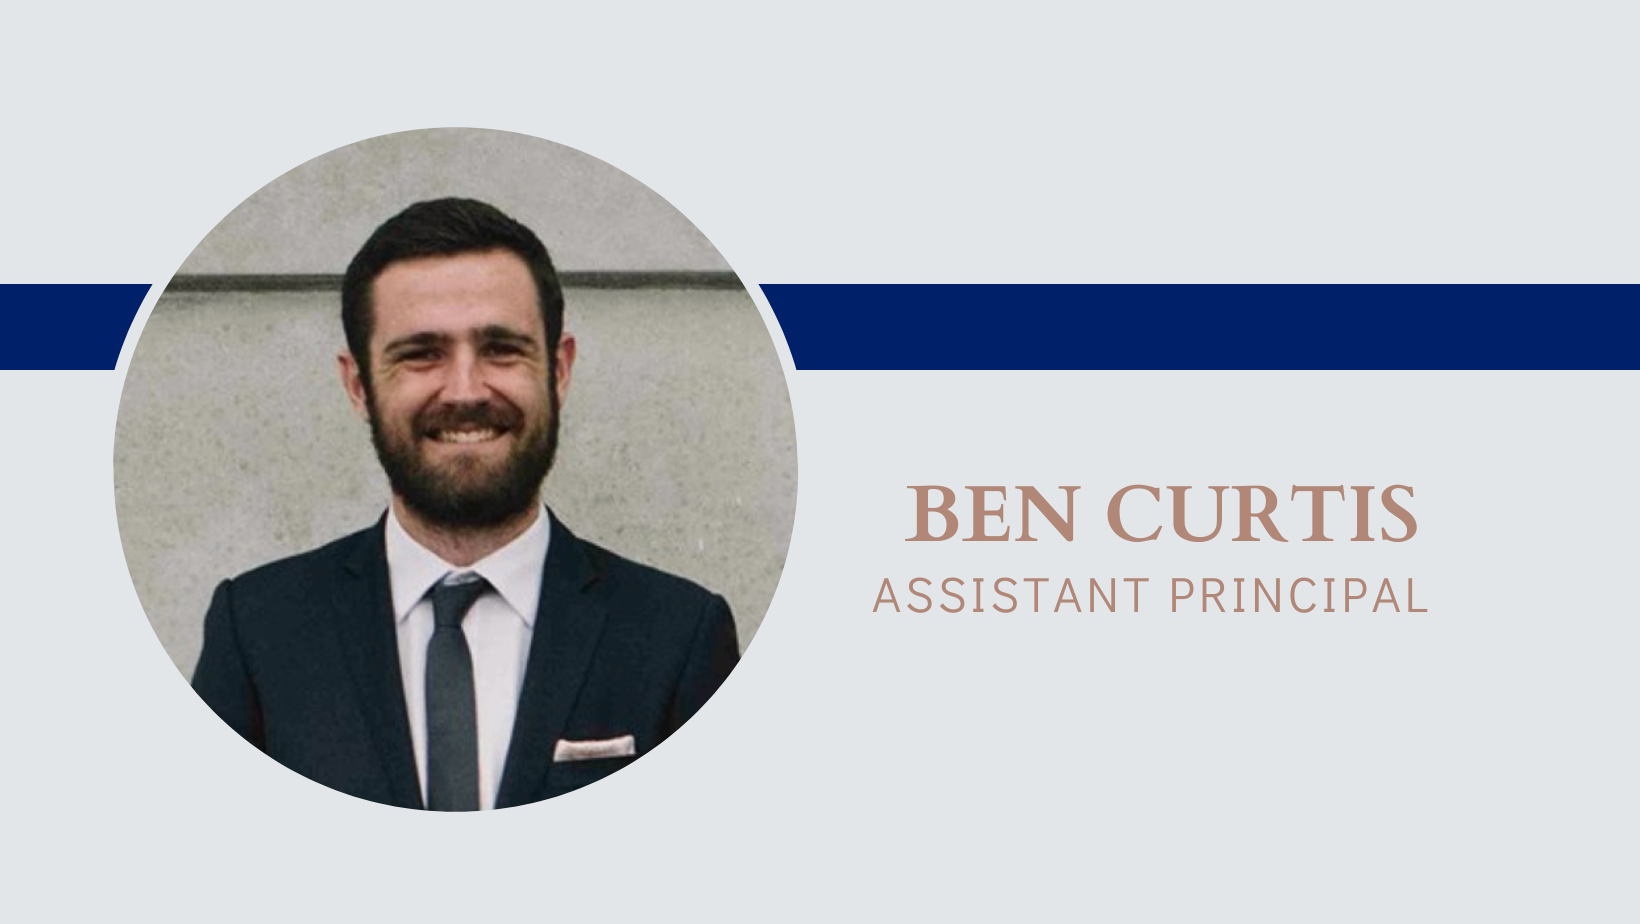 We Welcome New Assistant Principal, Ben Curtis to the Team